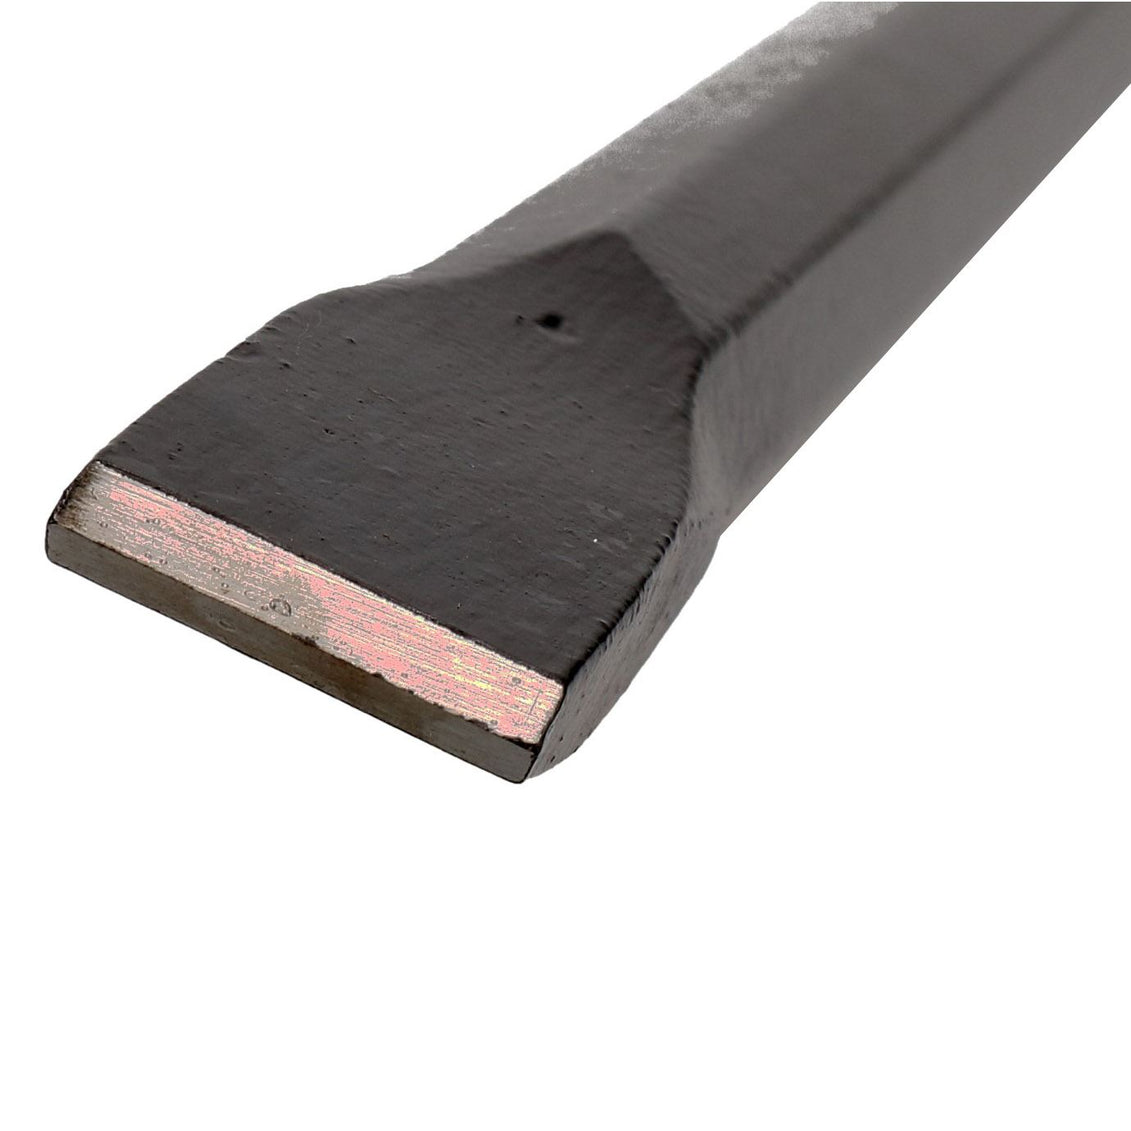 600mm x 25mm Hardened Steel Constant Cold Chisel For Brick Stone Block Steel